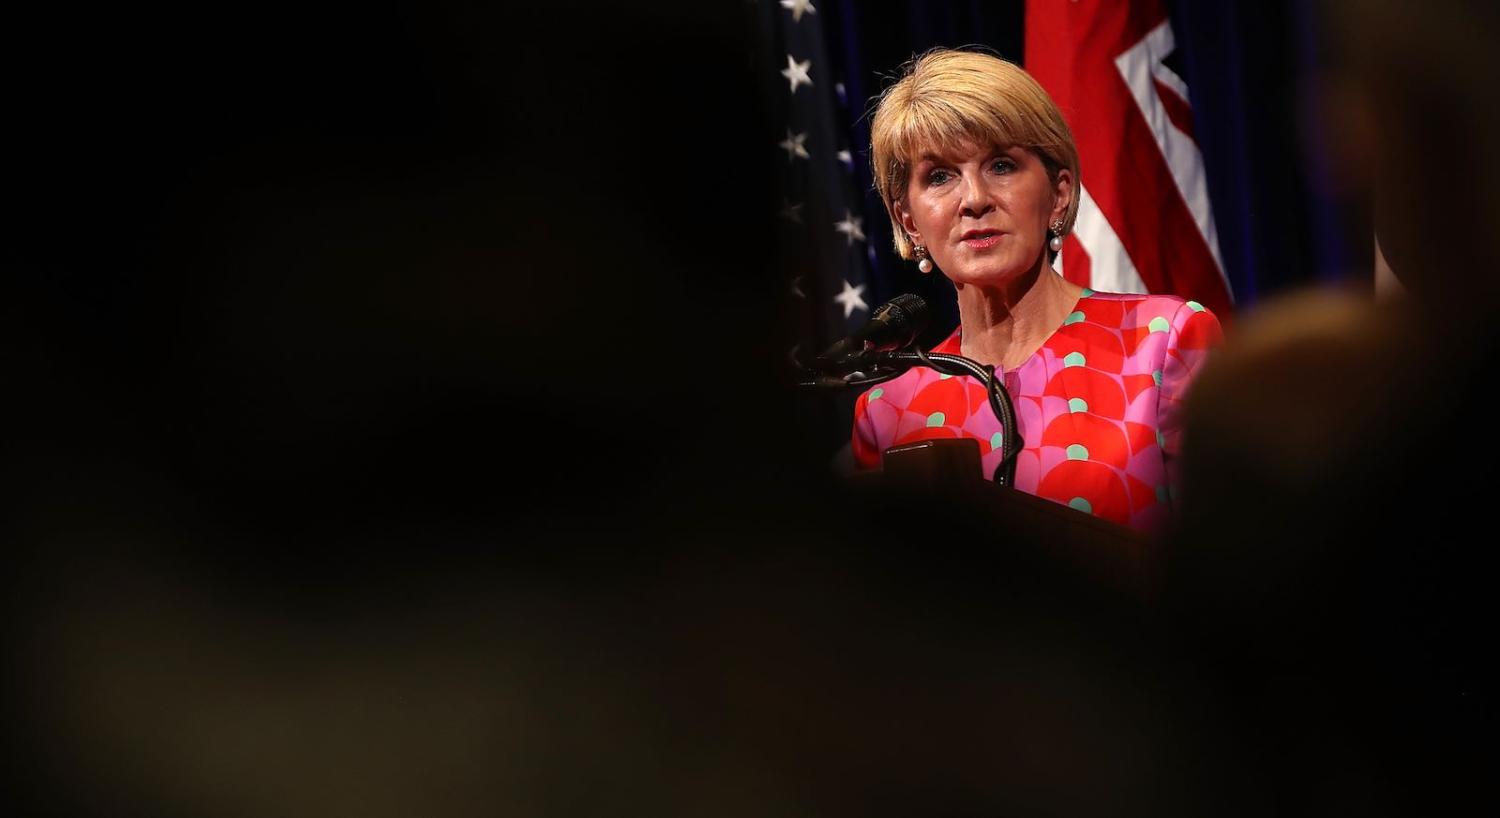 Julie Bishop at Stanford University, California, for the Australia-US Ministerial meeting in July (Photo: Justin Sullivan/Getty)